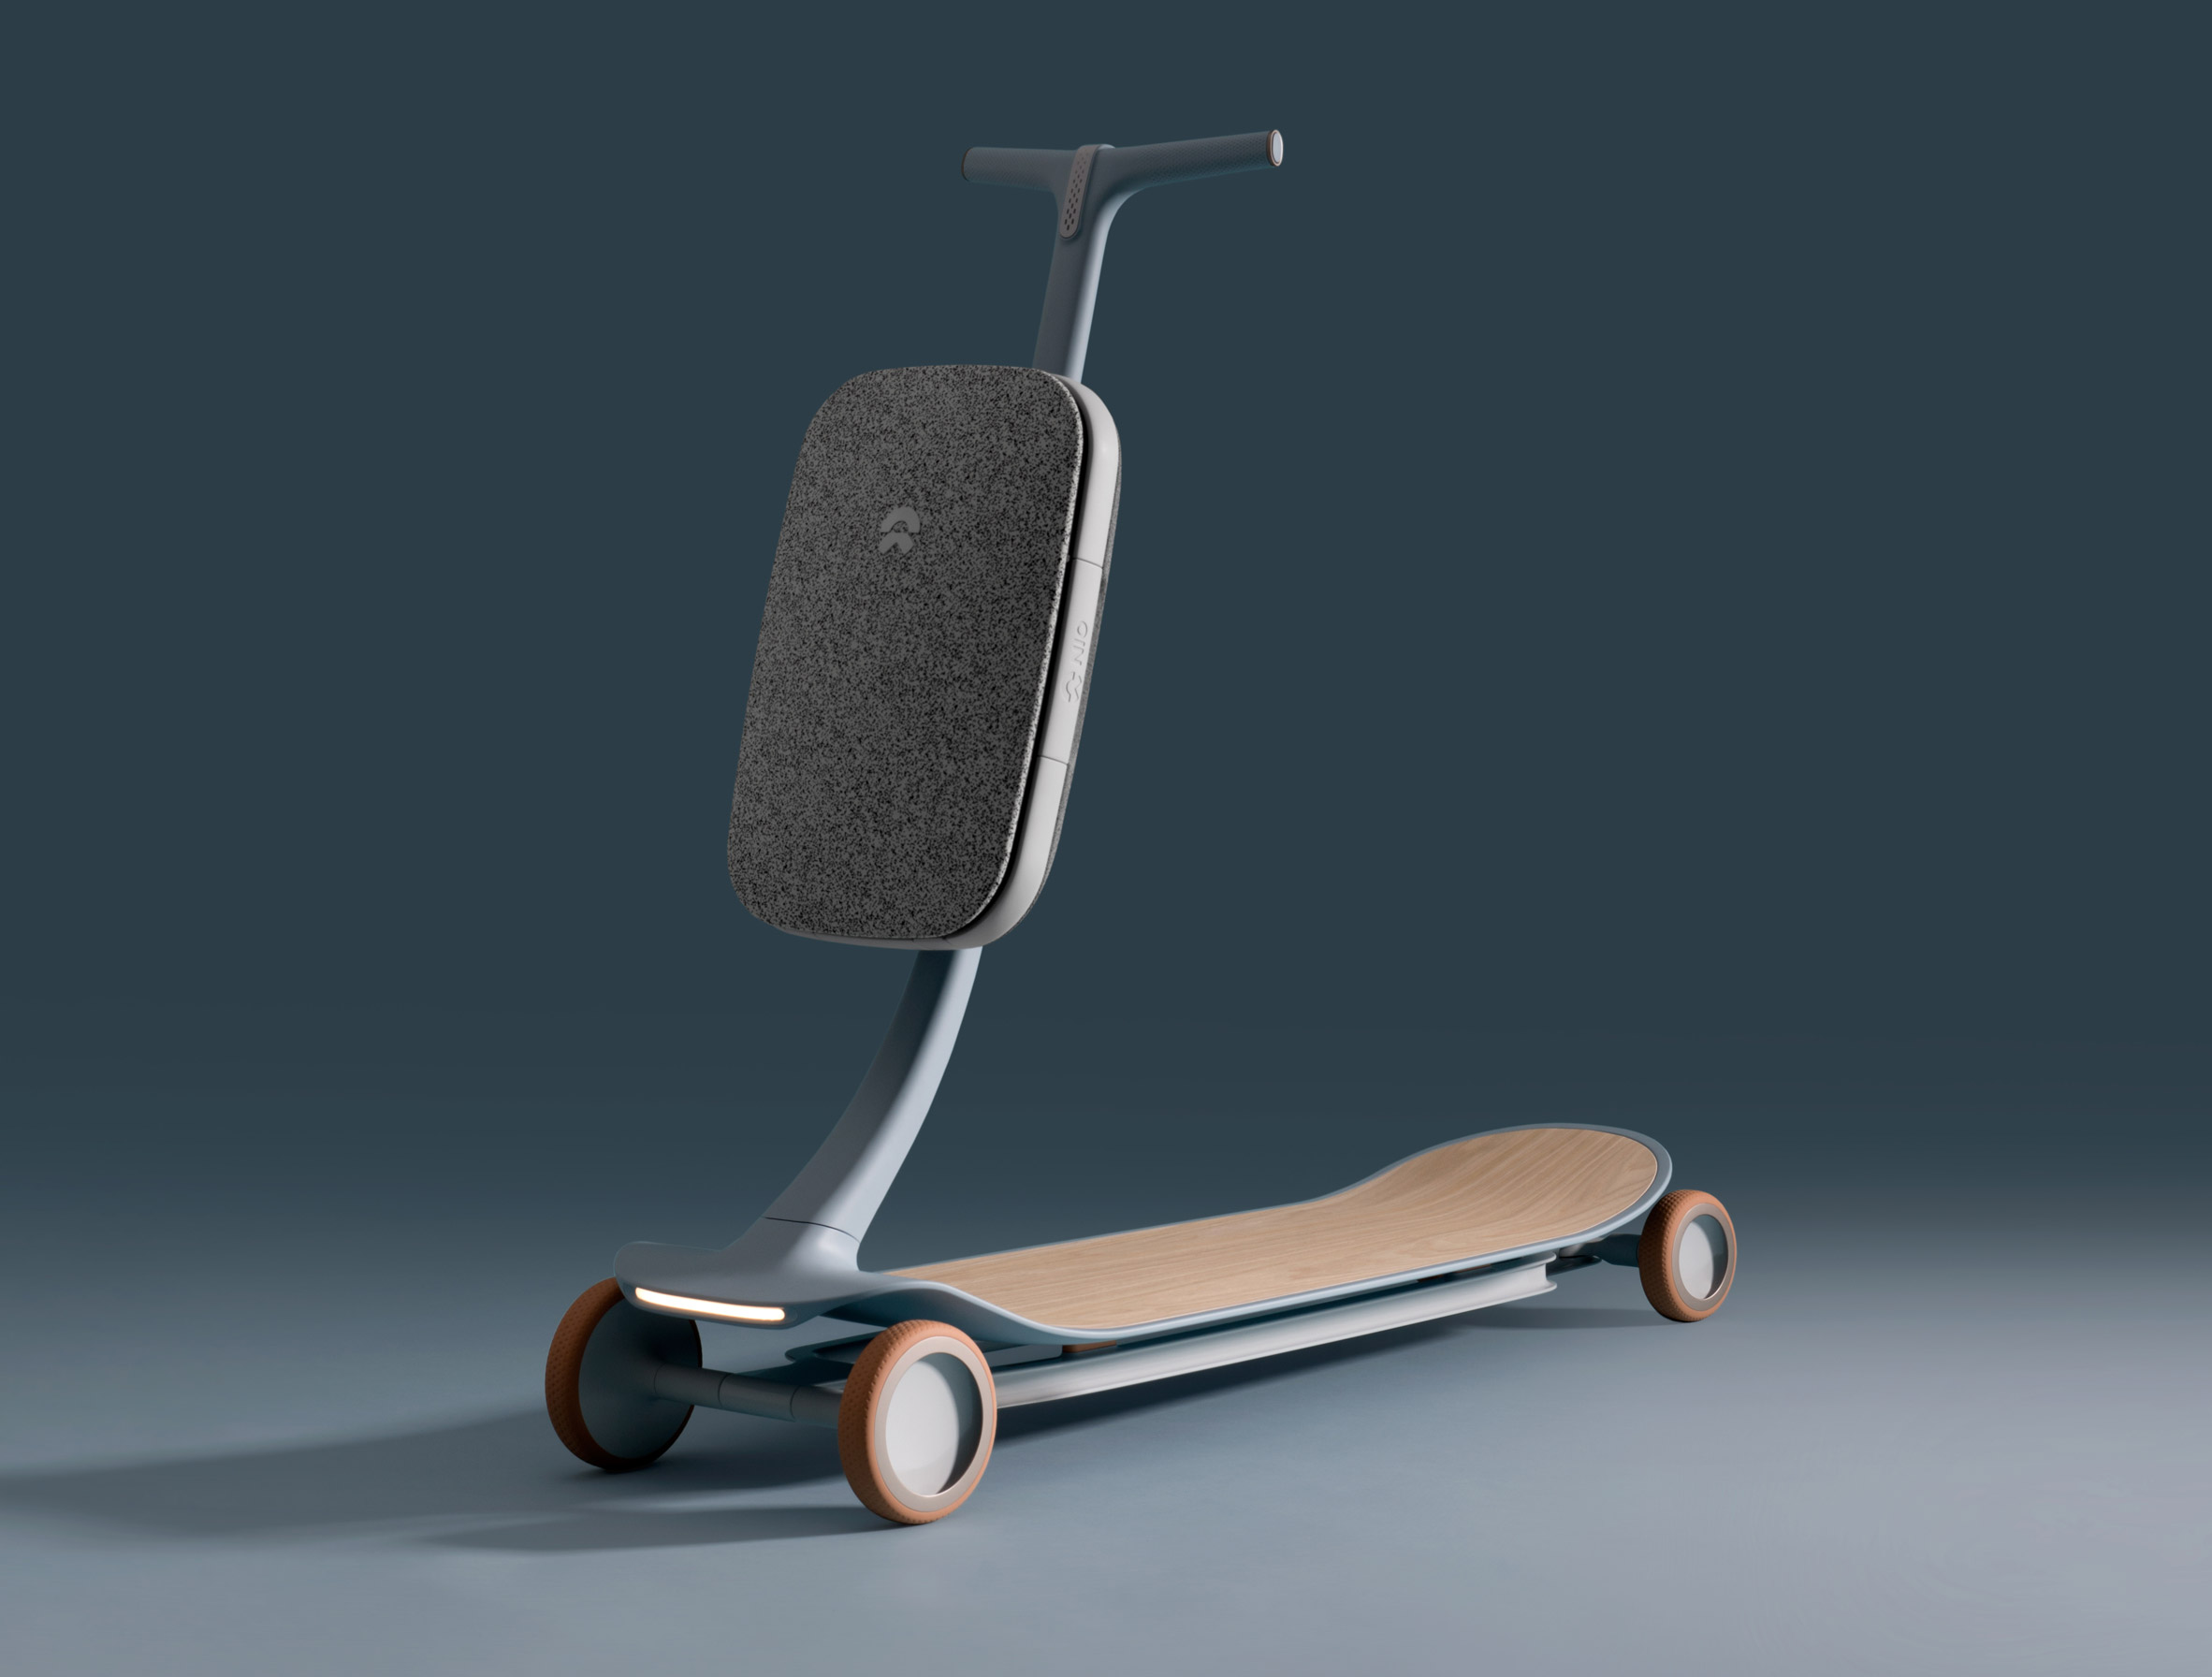 Layer and Nio's intelligent Pal scooter learns your